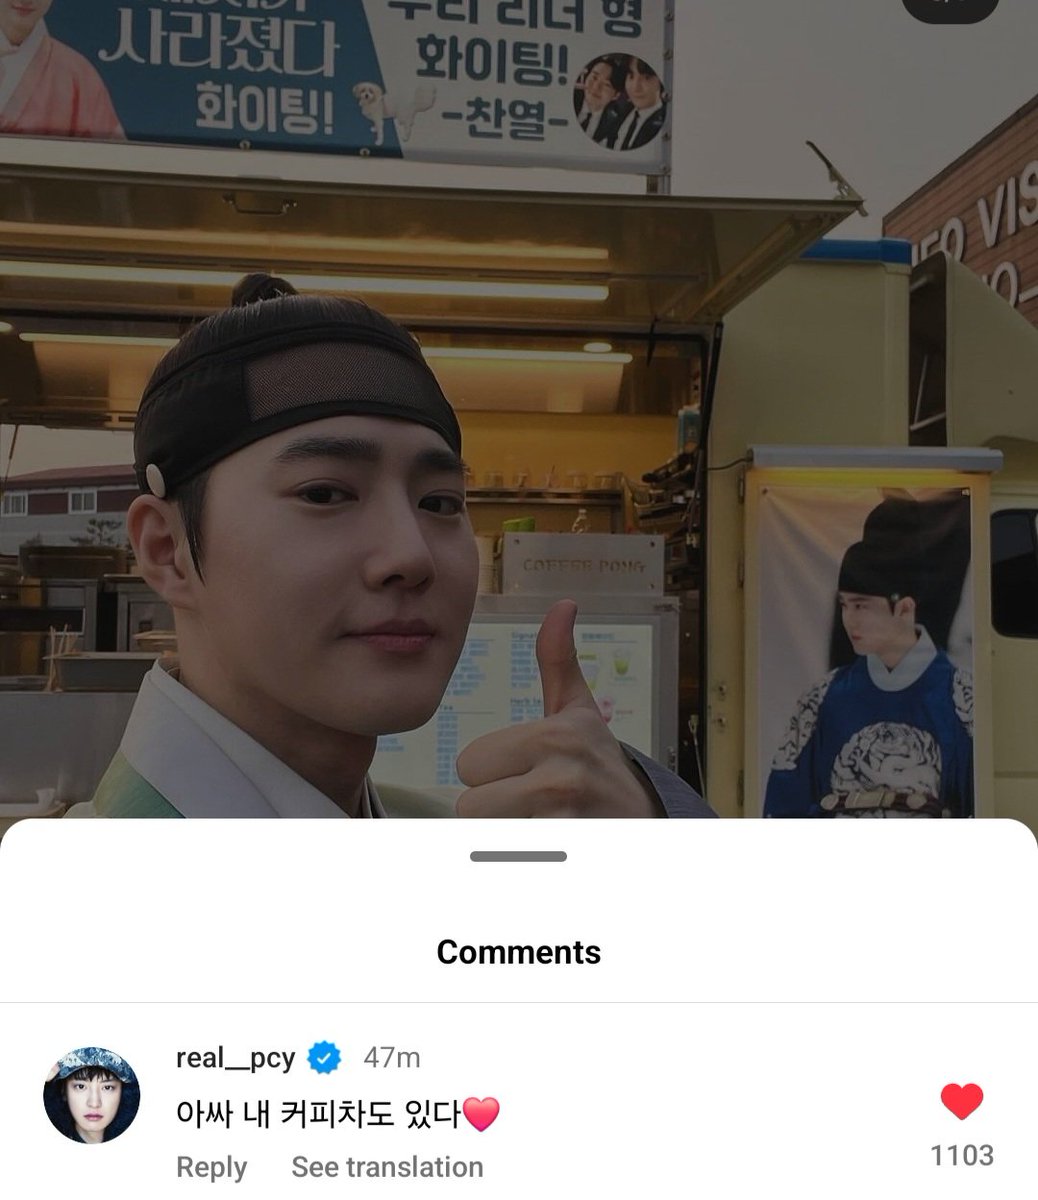 Chanyeol commented on Suho's IG post 🥹

'Oh yeah, my coffeetruck is here too ❤️'